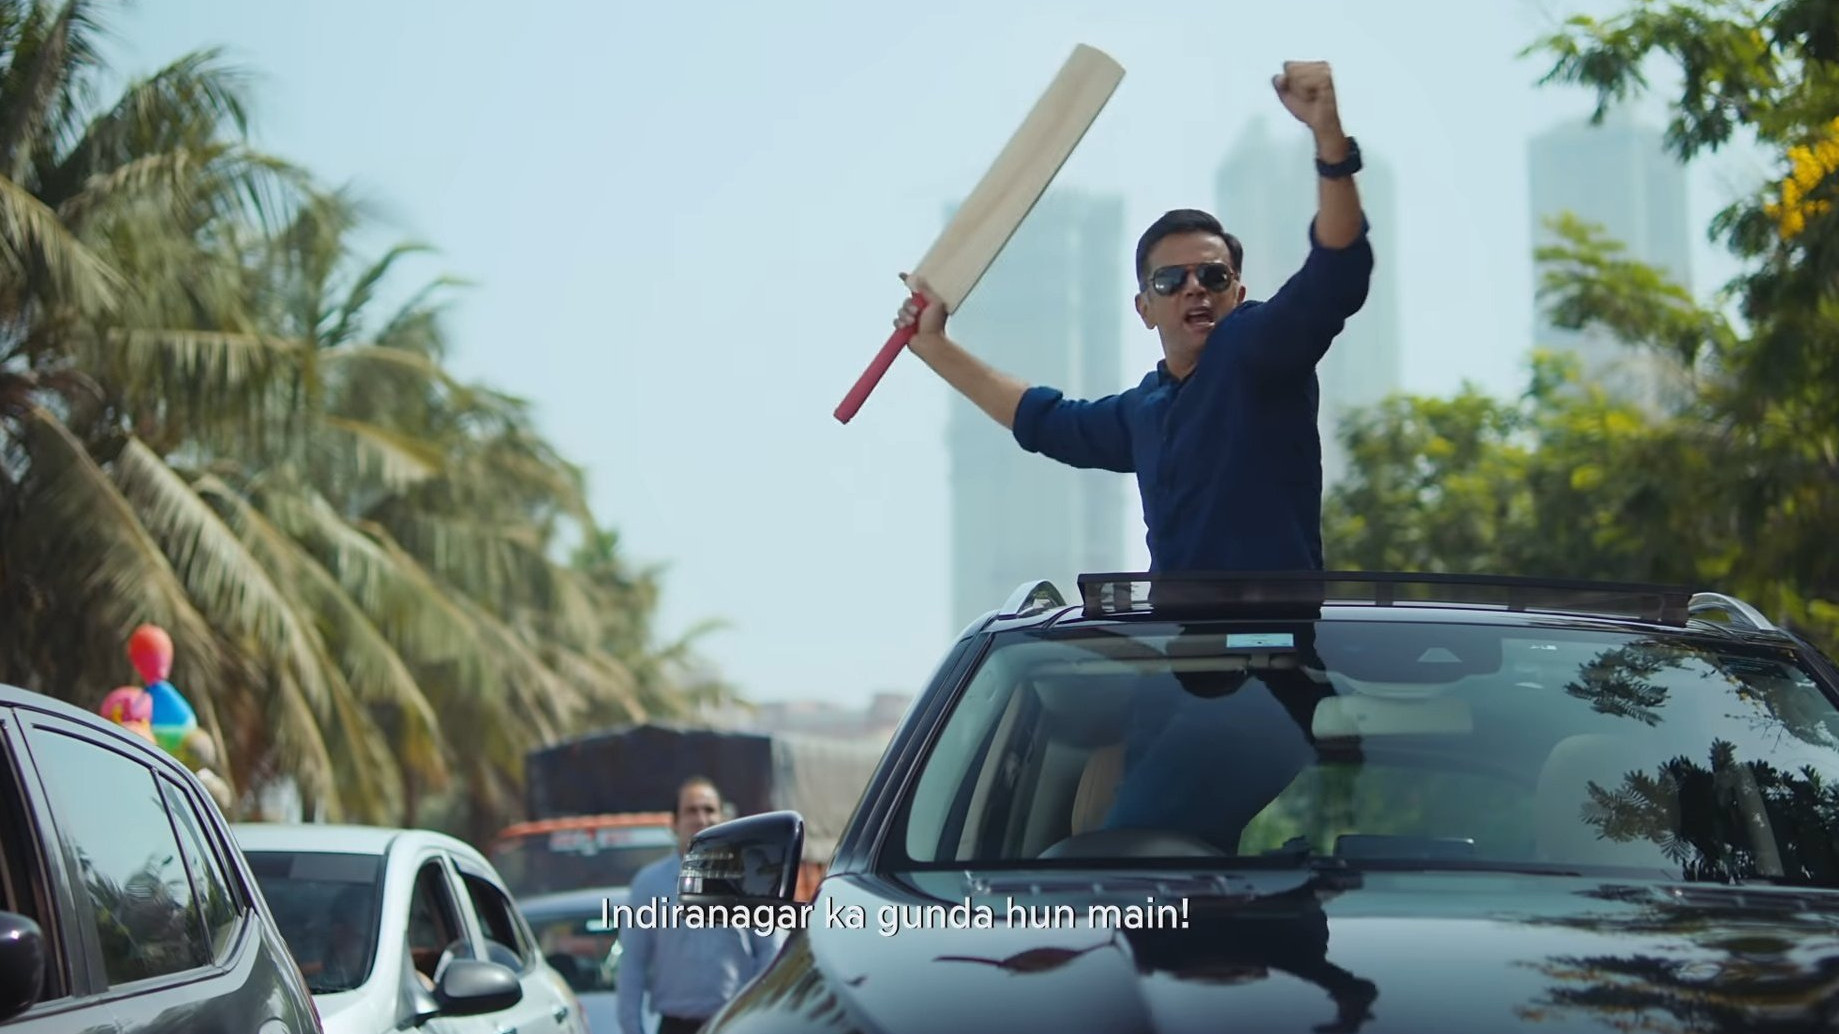 Zomato posts a cheeky tweet after Rahul Dravid turns angry 'gunda' in a TVC